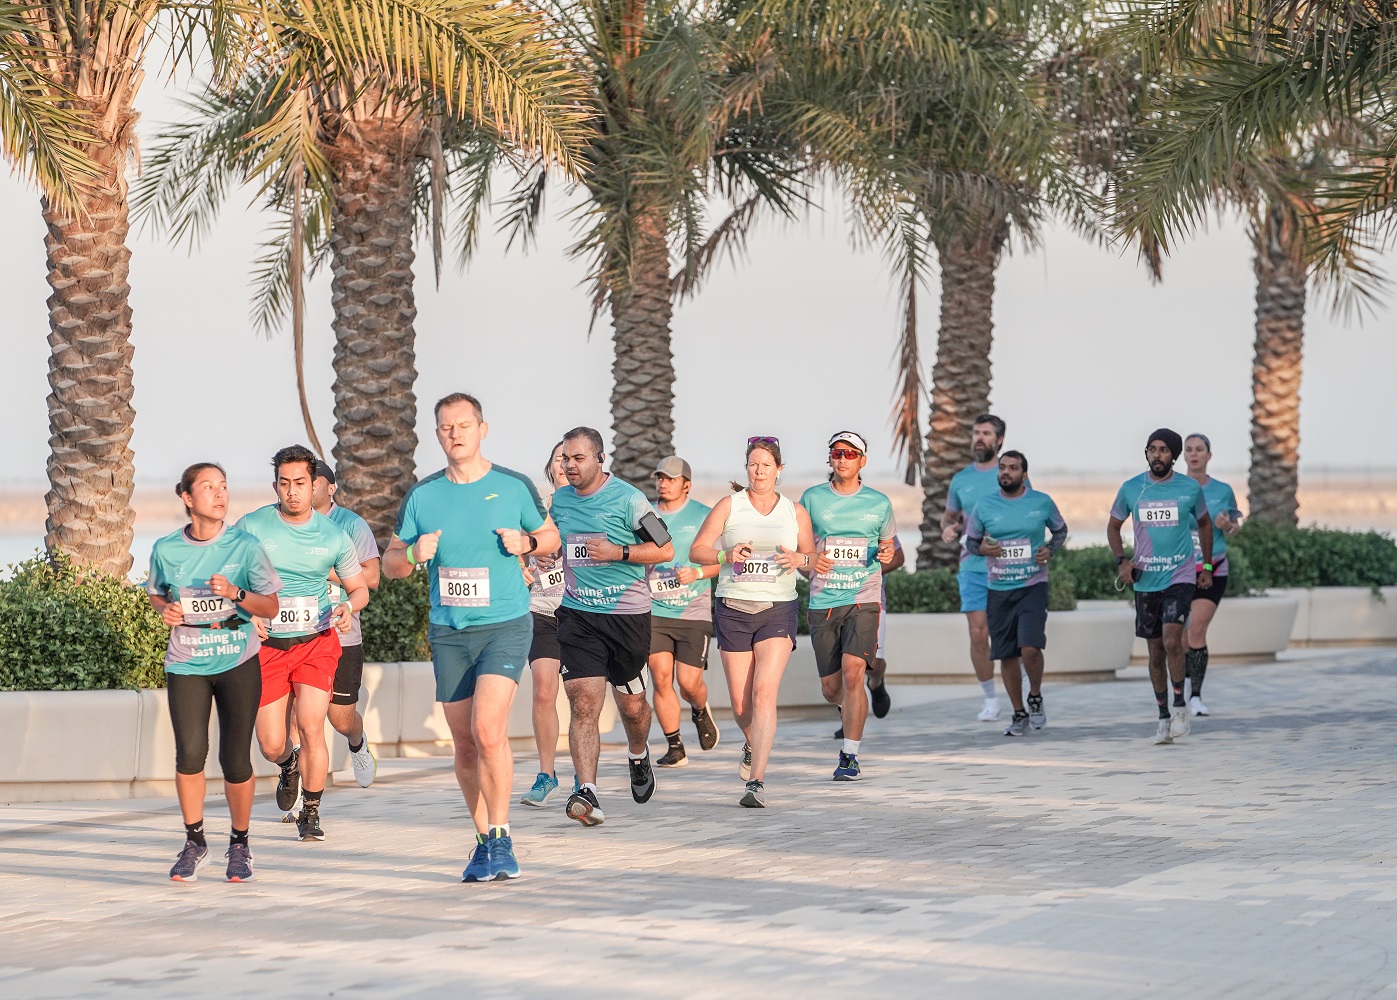 ‘Reaching The Last Mile’ Charity Run To Return In 2023, Bringing Together Communities To Raise Funds For Neglected Tropical Diseases